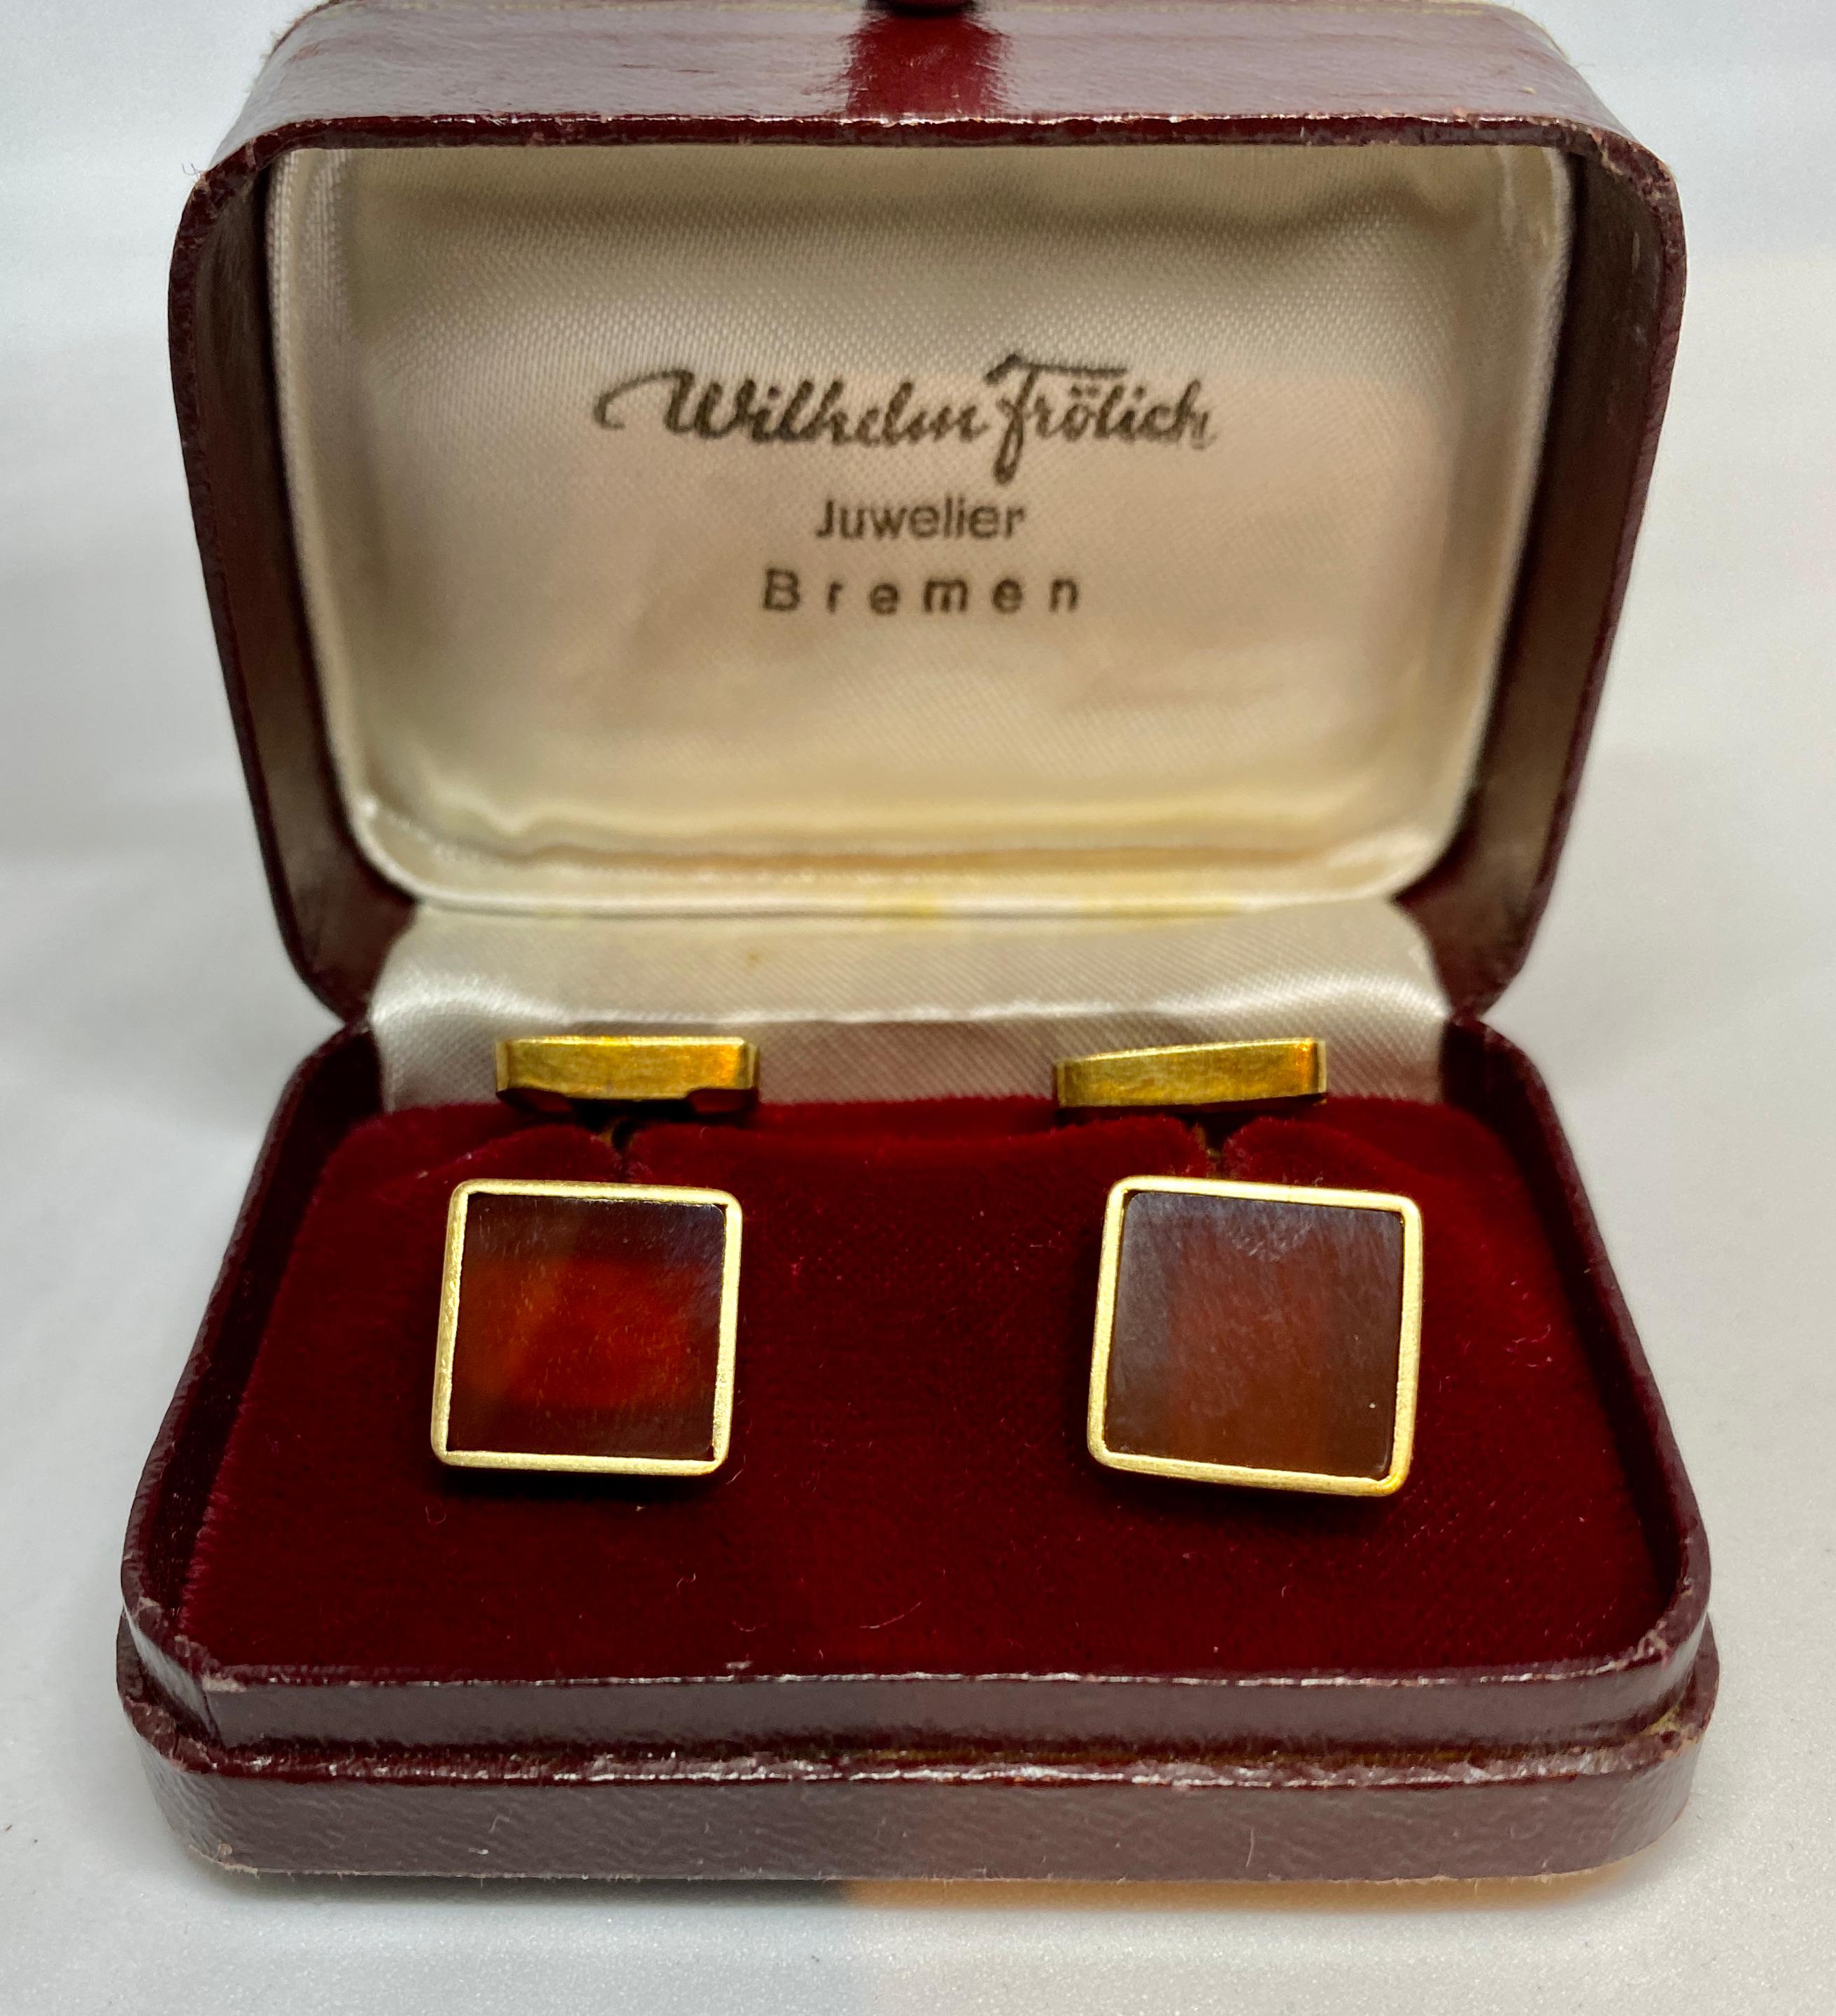 A very fine pair of double-sided cufflinks featuring four square-cut carnelians set in 14K yellow gold with chain connectors. Comes in original box from Wilhelm Frölich of Bremen, Germany.

Each of the four cufflink faces measures 12.8mm square and